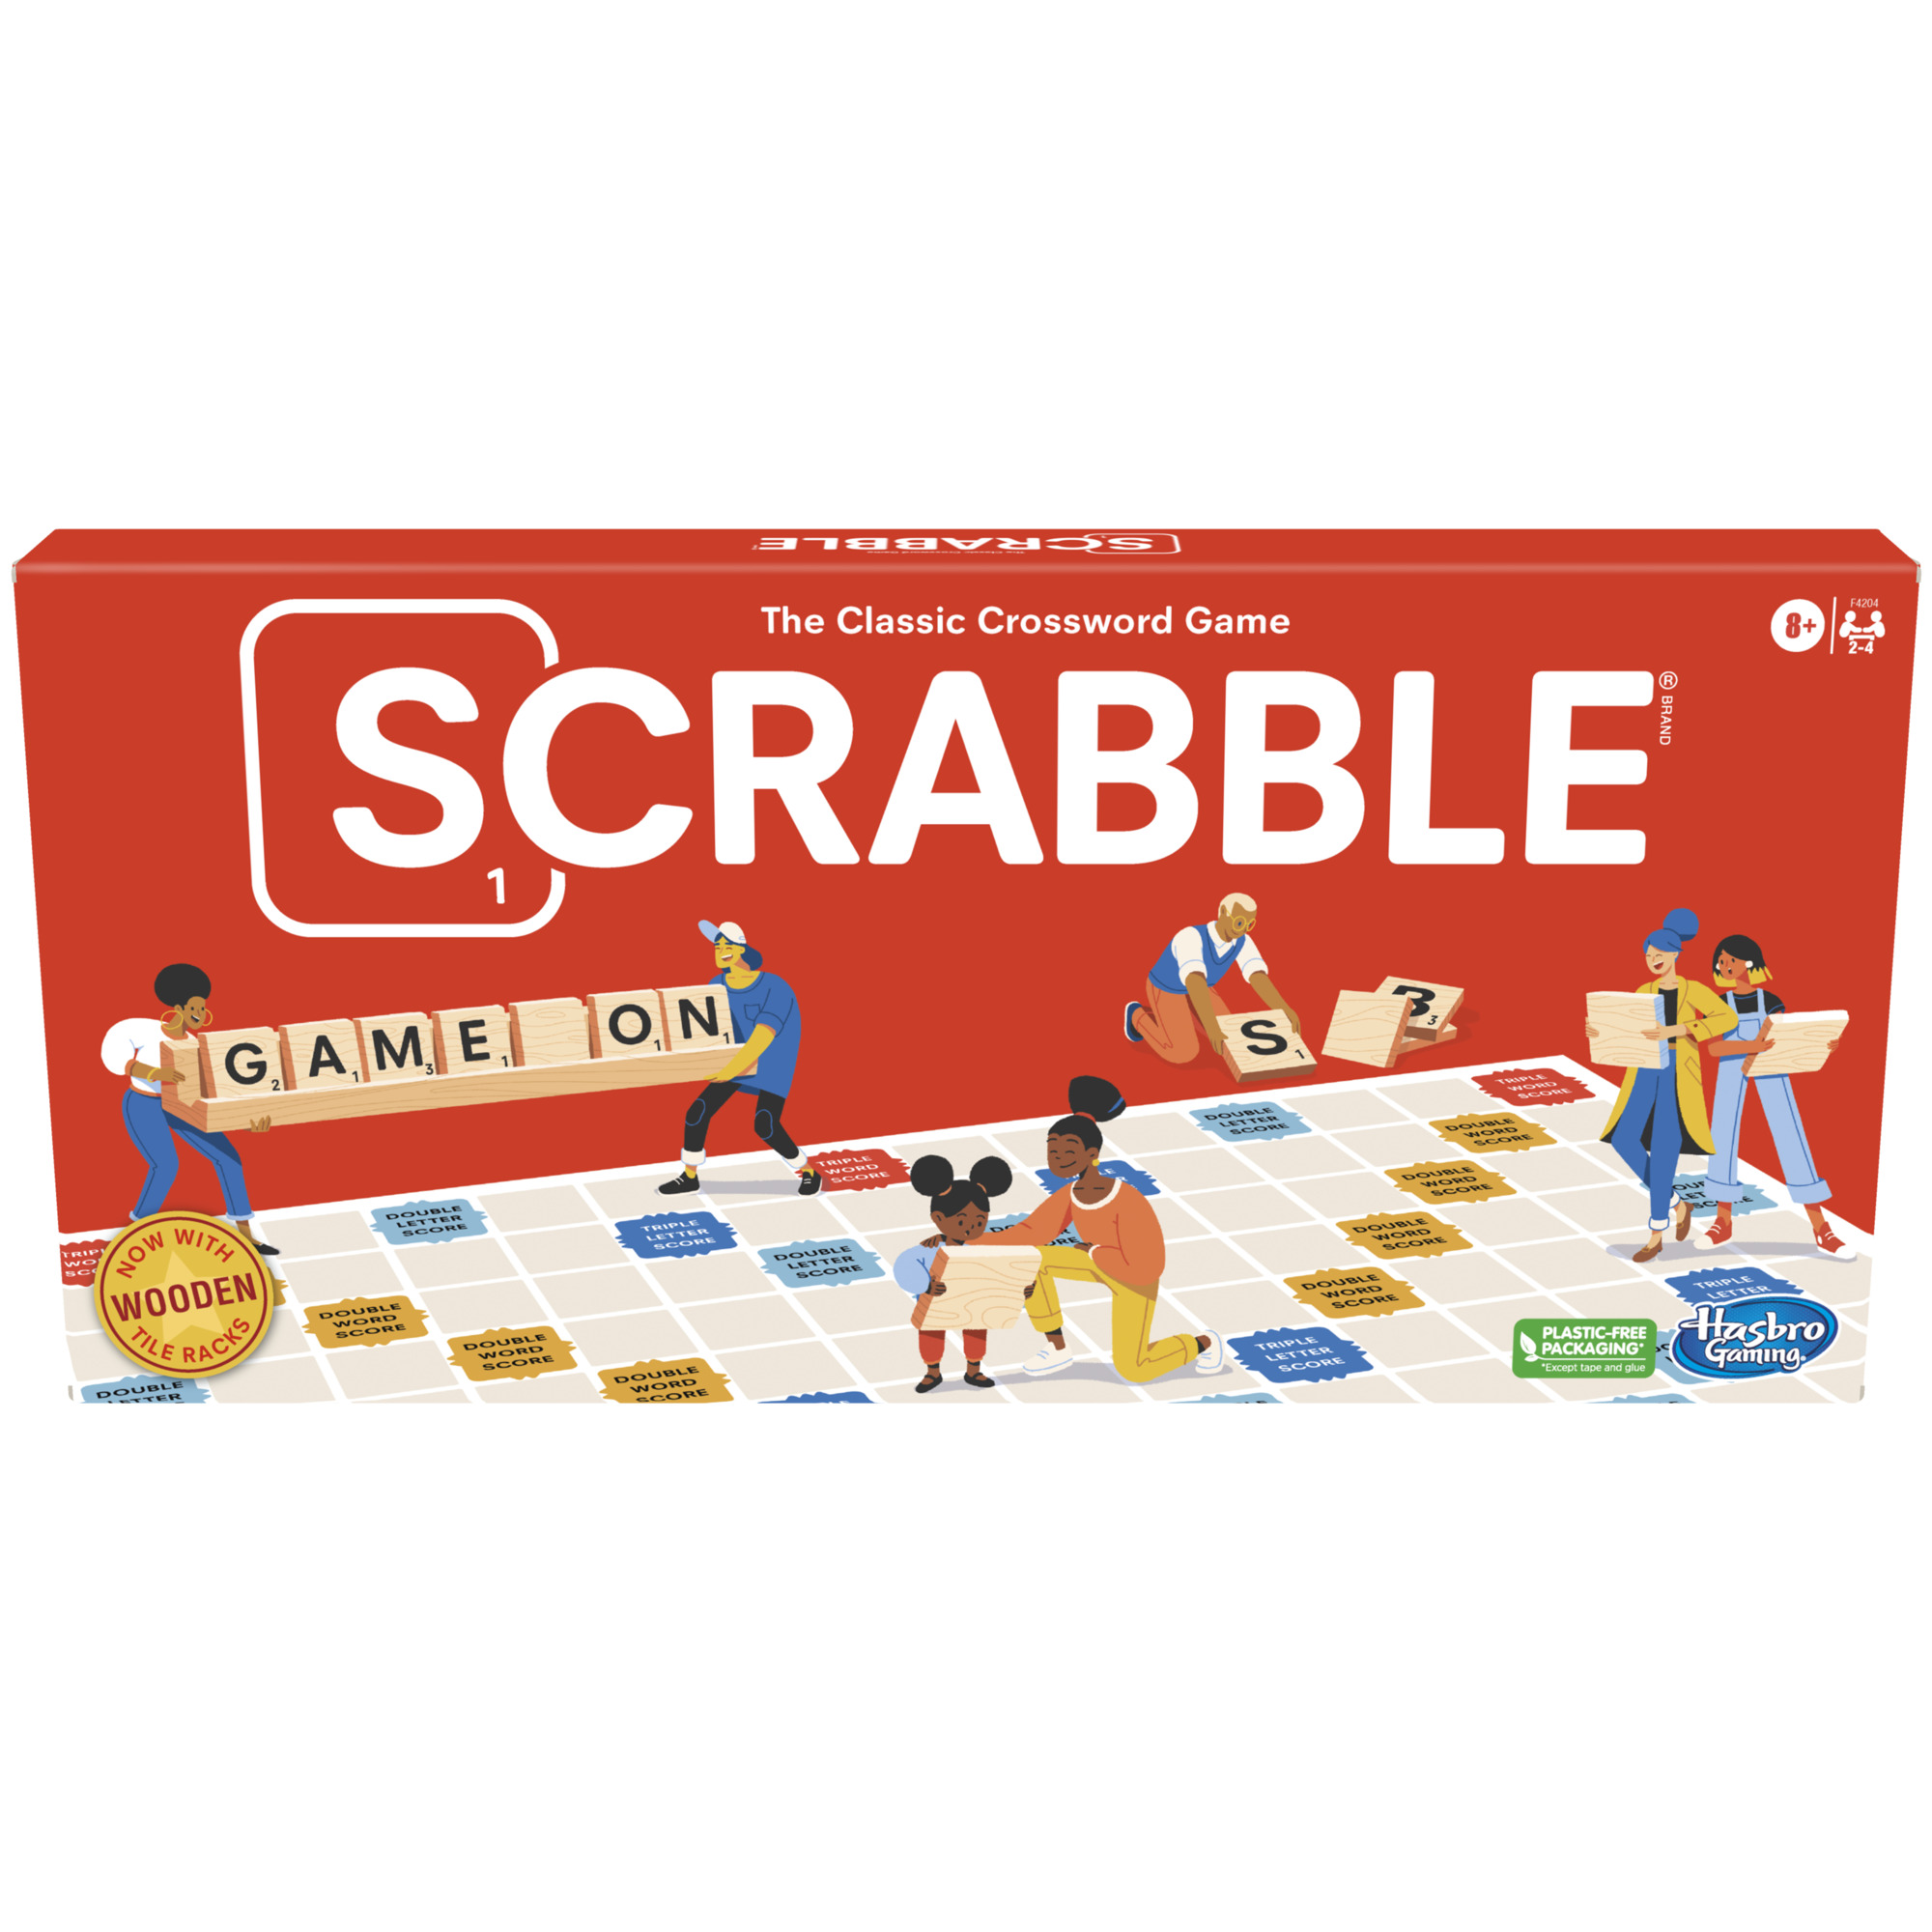 Scrabble Board Game for Kids and Family Ages 8 and Up, 2-4 Players - image 1 of 7